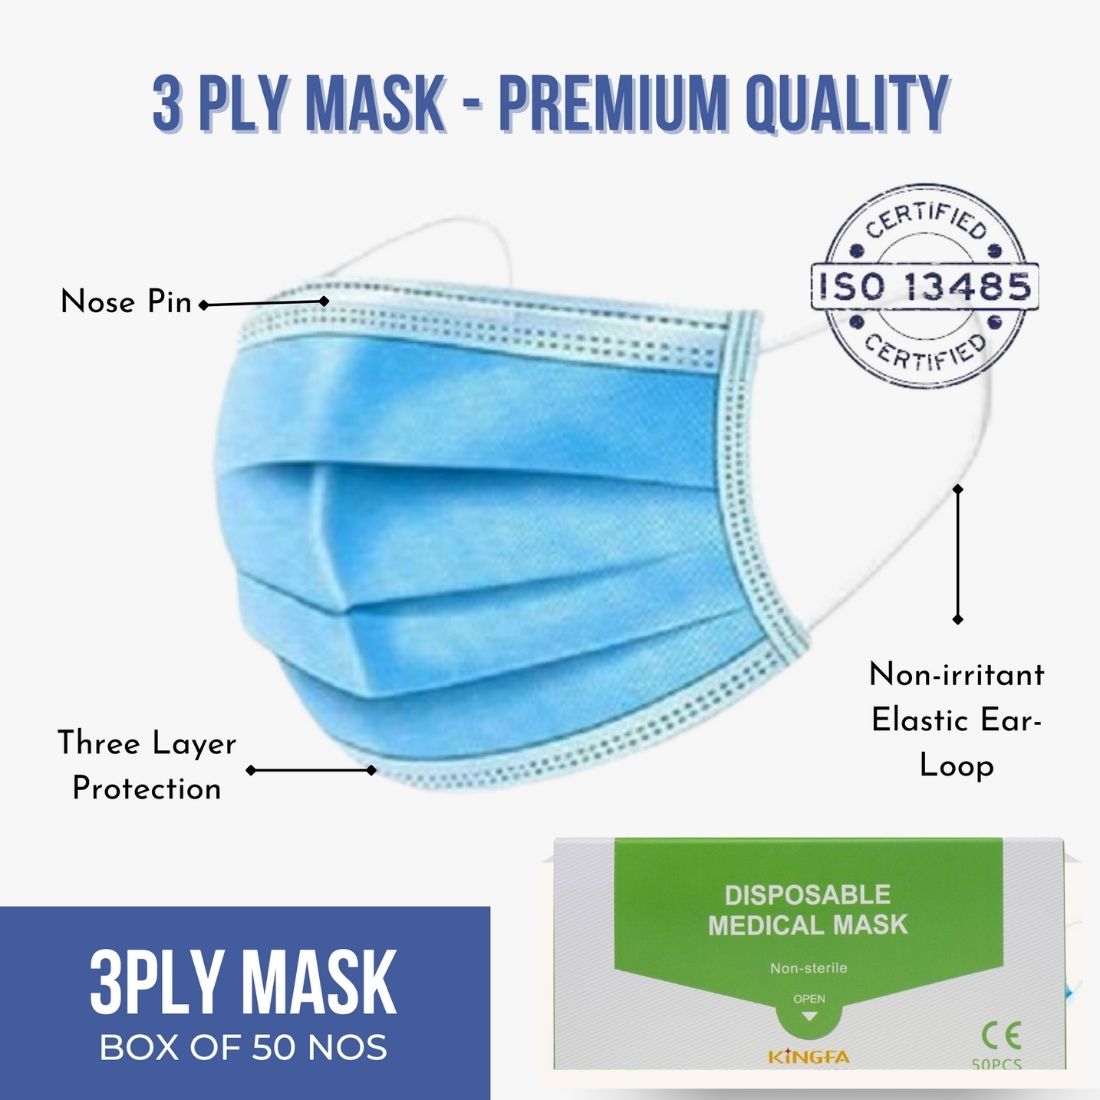 3 Ply Mask with Nose Pin - Premium Quality - 50 Pcs/Box